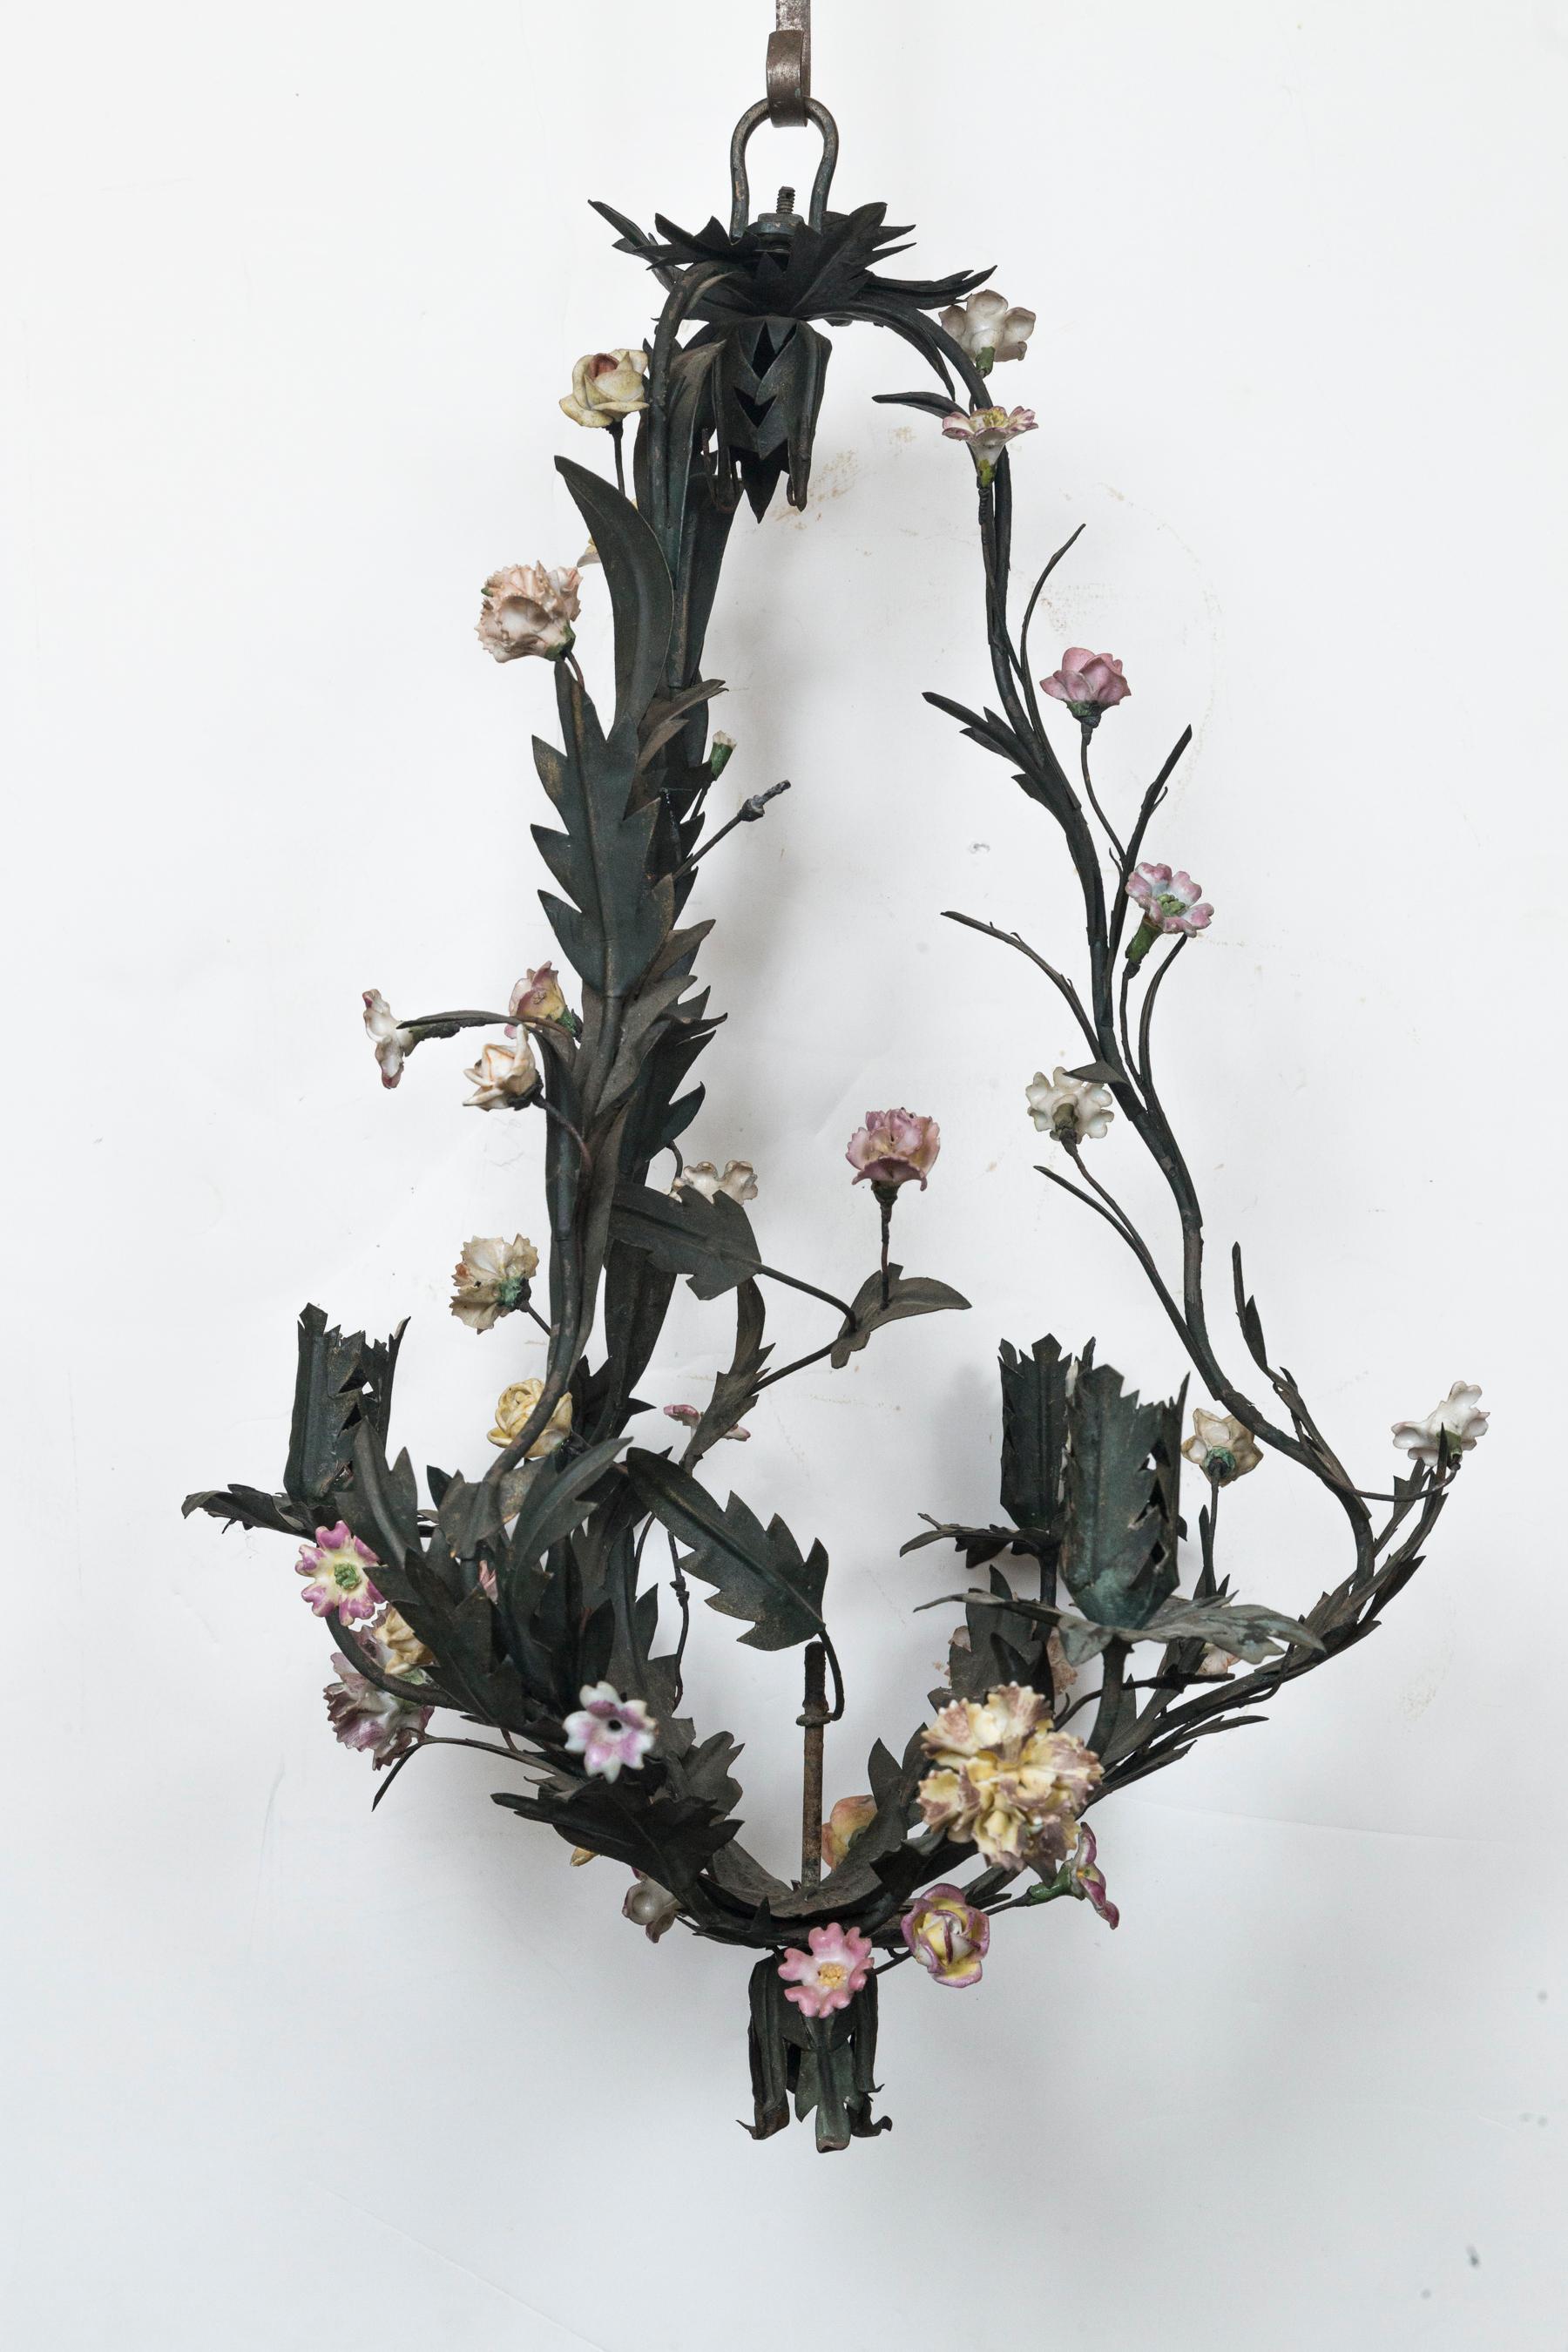 Painted dark green tole with small porcelain flowers, a small number of which are missing. Acanthus leaf decoration on the frame and arms. Having a pear shape. Three arms with leaf form candle cups. The same leaf form hangs inside from the top and